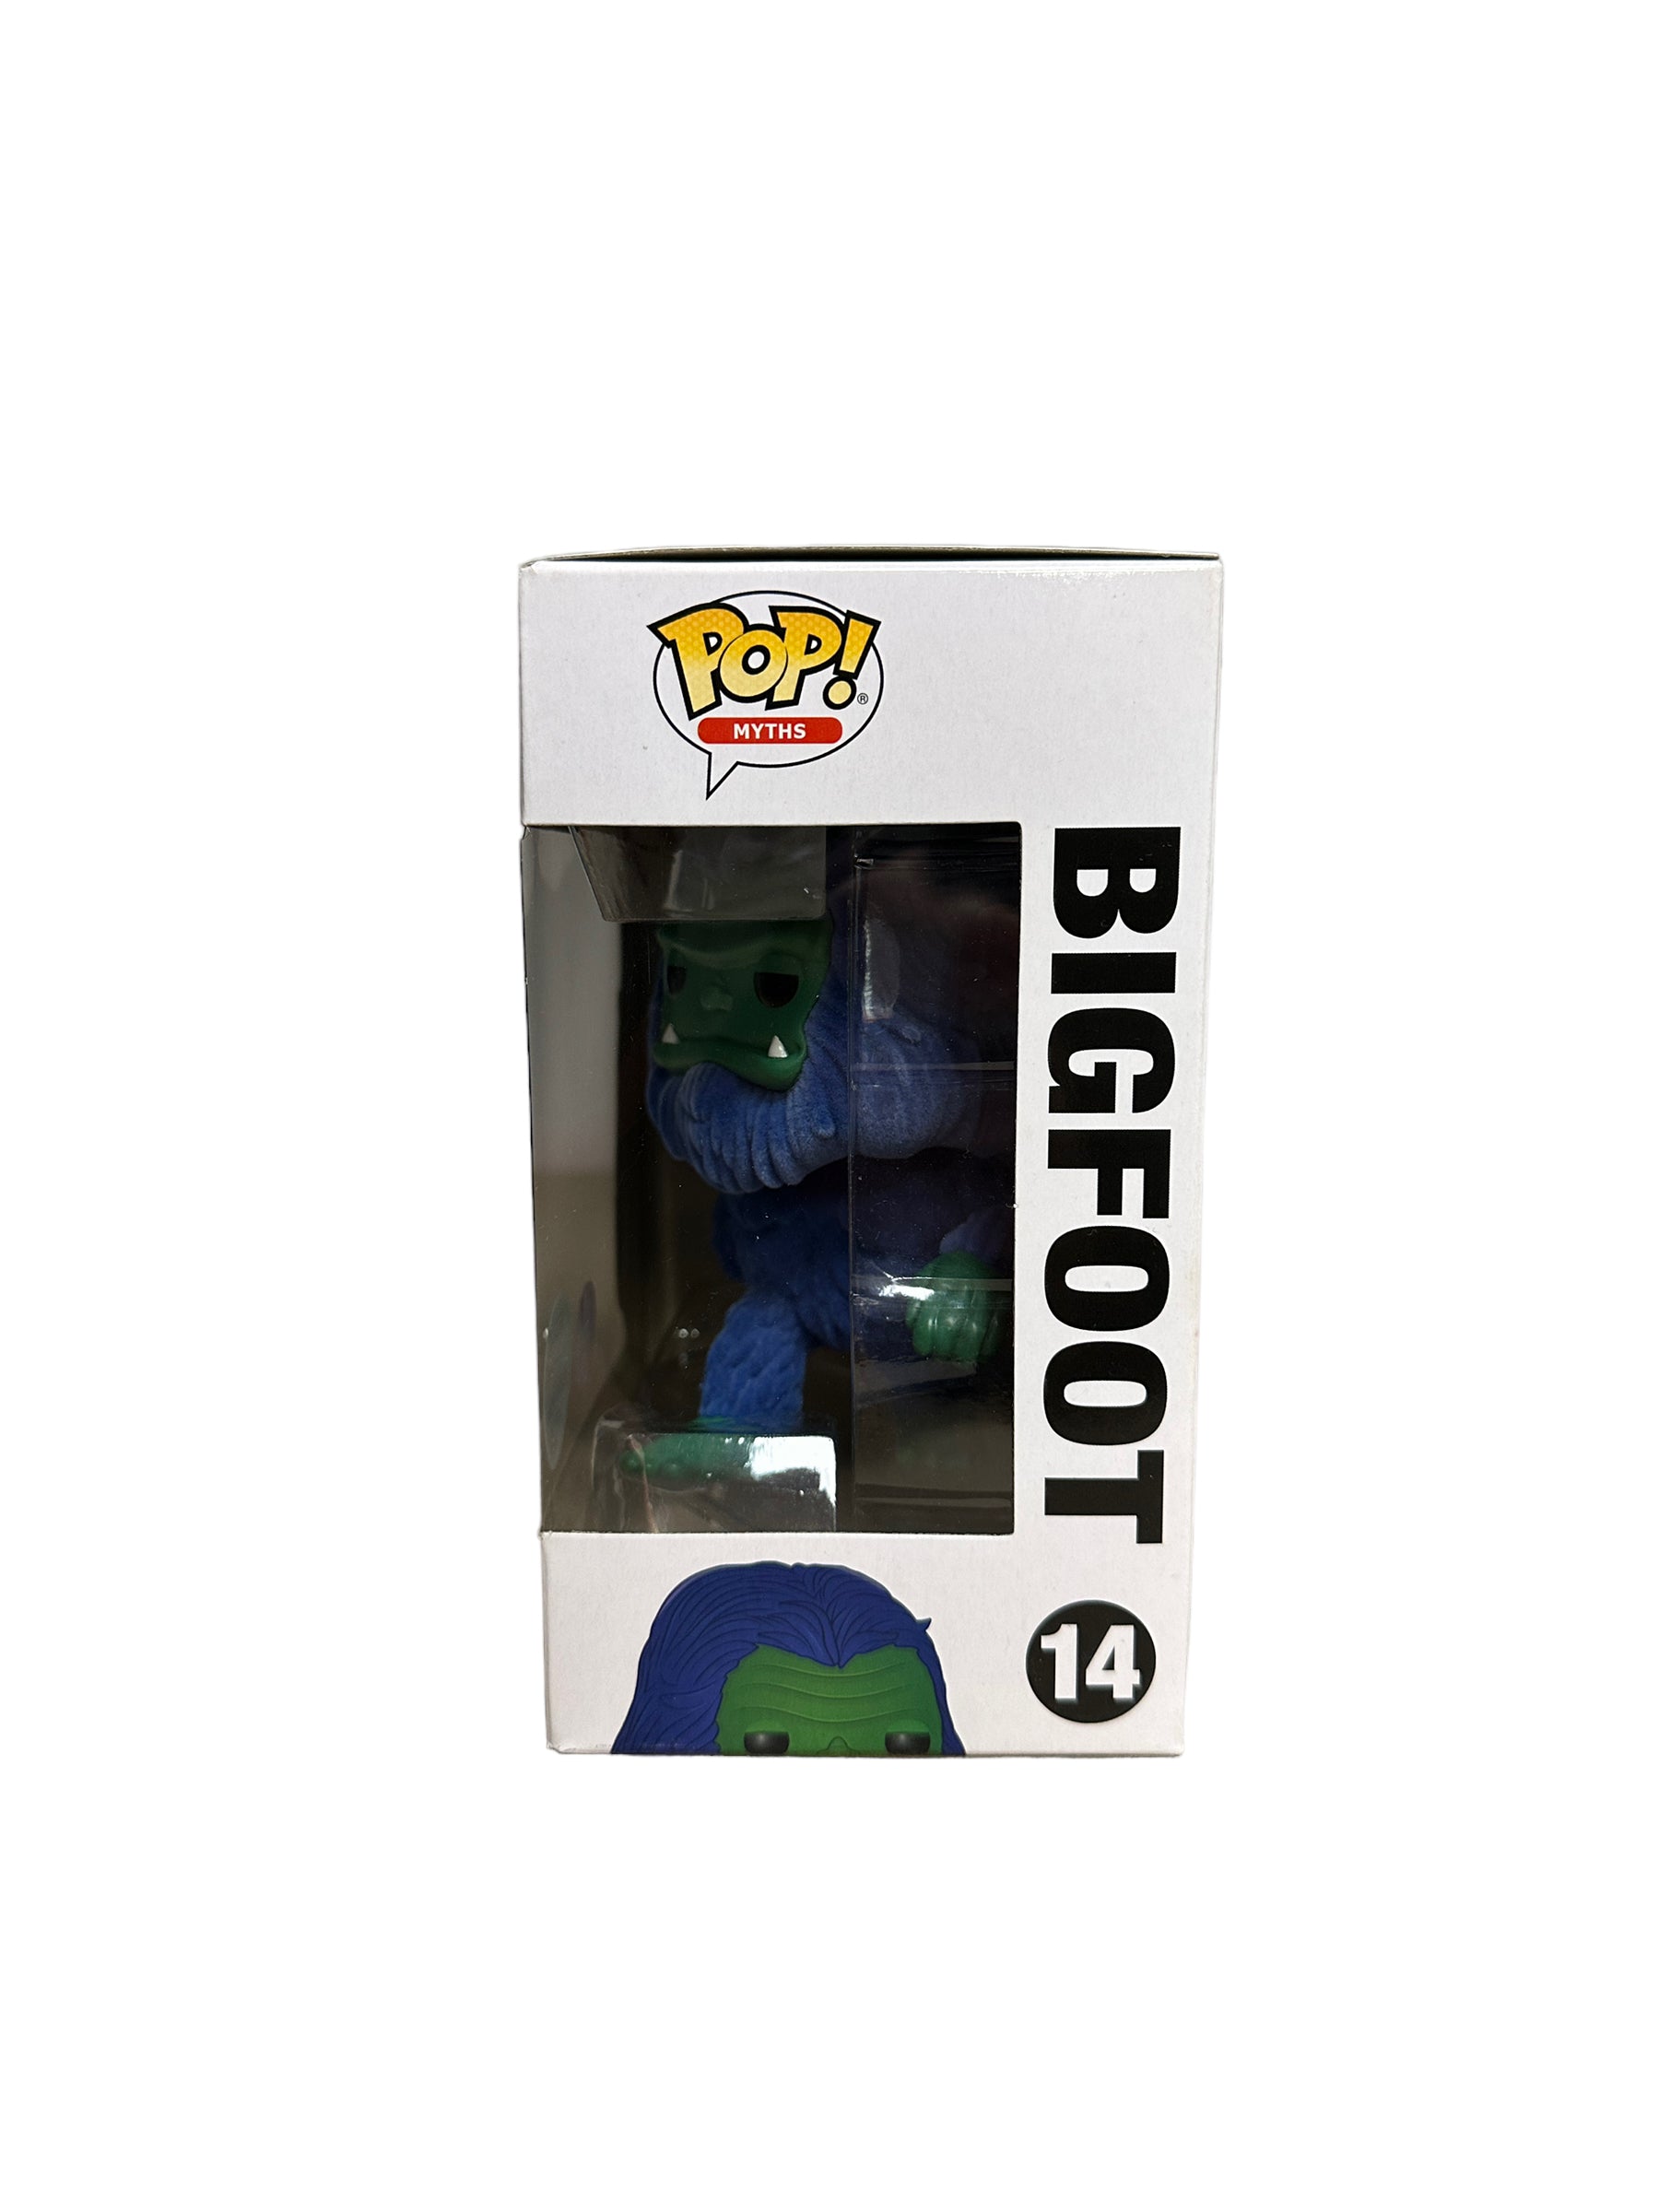 Bigfoot #14 (Blue / Green Flocked) Funko Pop! - Myths - ECCC 2018 Shared Exclusive LE2500 Pcs - Condition 8.5/10